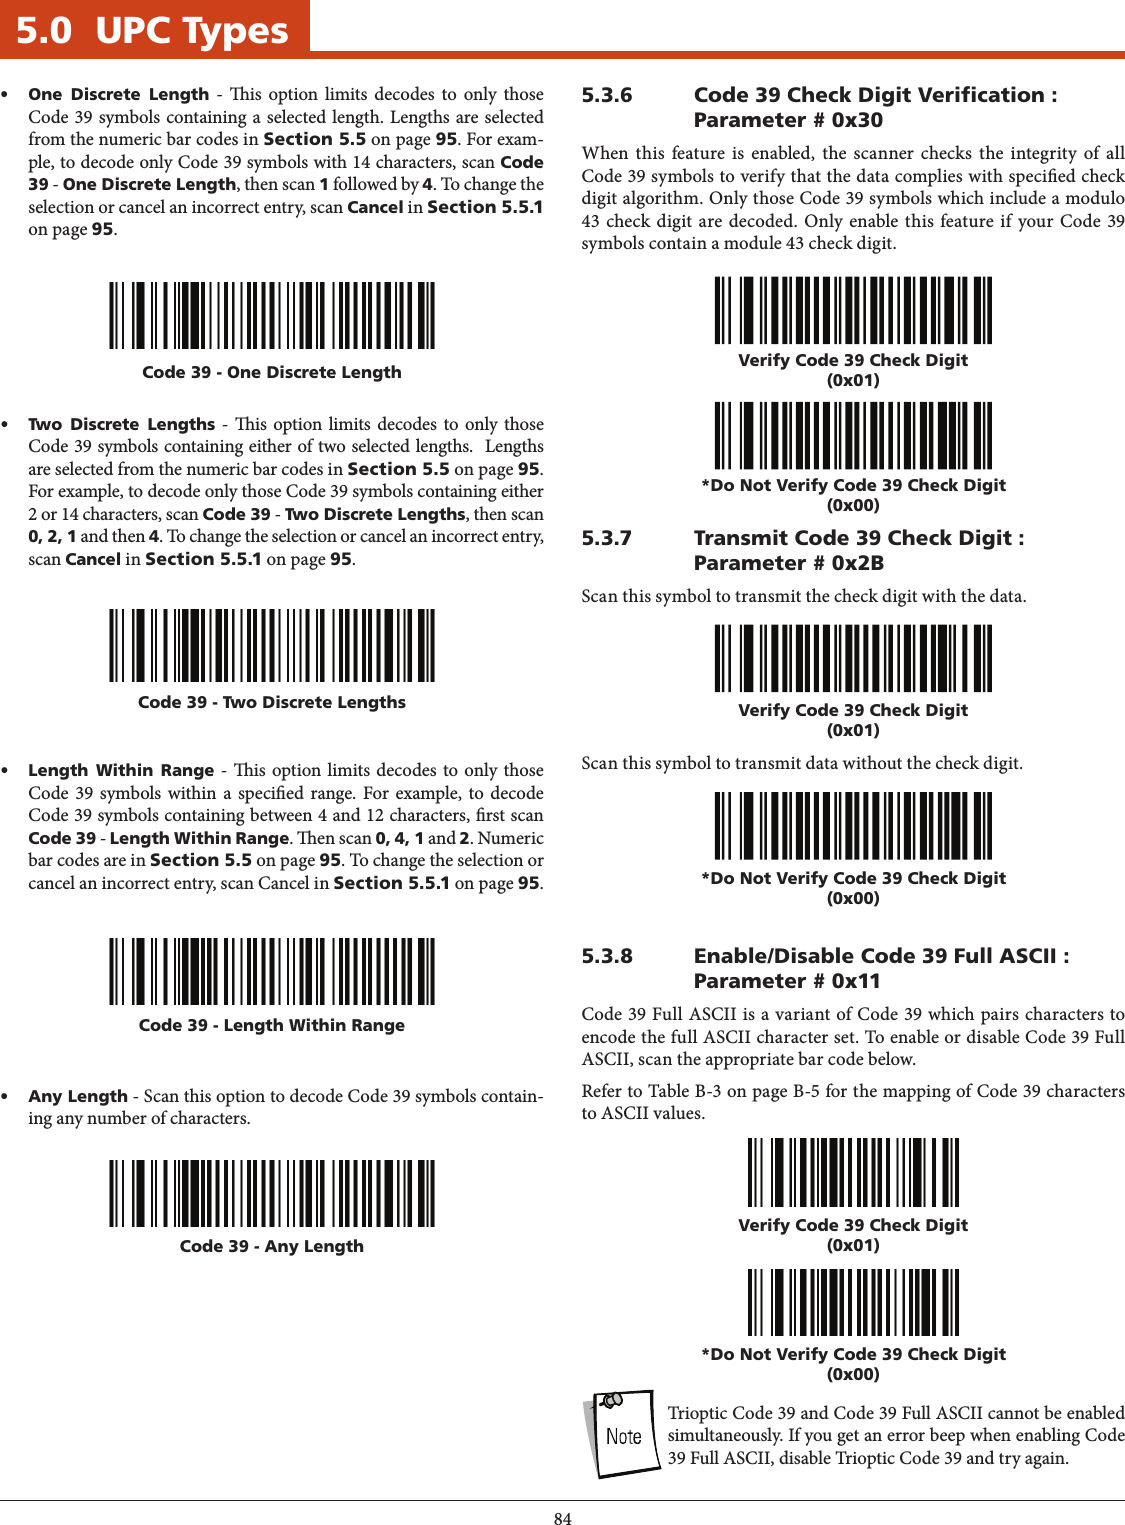 845.0  UPC TypesCode 39 - Two Discrete LengthsCode 39 - Length Within Range• Two Discrete Lengths - is option limits decodes to only those Code 39 symbols containing either of two selected lengths.  Lengths are selected from the numeric bar codes in Section 5.5 on page 95. For example, to decode only those Code 39 symbols containing either 2 or 14 characters, scan Code 39 - Two Discrete Lengths, then scan 0, 2, 1 and then 4. To change the selection or cancel an incorrect entry, scan Cancel in Section 5.5.1 on page 95.• Length Within Range - is option limits decodes to only those Code 39 symbols within a specied range. For example, to decode Code 39 symbols containing between 4 and 12 characters, rst scan Code 39 - Length Within Range. en scan 0, 4, 1 and 2. Numeric bar codes are in Section 5.5 on page 95. To change the selection or cancel an incorrect entry, scan Cancel in Section 5.5.1 on page 95.Code 39 - Any Length• Any Length - Scan this option to decode Code 39 symbols contain-ing any number of characters.5.3.6  Code 39 Check Digit Verication : Parameter # 0x30When this feature is enabled, the scanner checks the integrity of all Code 39 symbols to verify that the data complies with specied check digit algorithm. Only those Code 39 symbols which include a modulo 43 check digit are decoded. Only enable this feature if your Code 39 symbols contain a module 43 check digit.Verify Code 39 Check Digit(0x01)*Do Not Verify Code 39 Check Digit(0x00)5.3.7  Transmit Code 39 Check Digit : Parameter # 0x2BScan this symbol to transmit the check digit with the data.Scan this symbol to transmit data without the check digit.Verify Code 39 Check Digit(0x01)*Do Not Verify Code 39 Check Digit(0x00)5.3.8  Enable/Disable Code 39 Full ASCII : Parameter # 0x11Code 39 Full ASCII is a variant of Code 39 which pairs characters to encode the full ASCII character set. To enable or disable Code 39 Full ASCII, scan the appropriate bar code below.Refer to Table B-3 on page B-5 for the mapping of Code 39 characters to ASCII values.Verify Code 39 Check Digit(0x01)*Do Not Verify Code 39 Check Digit(0x00)NOTE:  Trioptic Code 39 and Code 39 Full ASCII cannot be enabled simultaneously. If you get an error beep when enabling Code 39 Full ASCII, disable Trioptic Code 39 and try again.Code 39 - One Discrete Length• One Discrete Length - is option limits decodes to only those Code 39 symbols containing a selected length. Lengths are selected from the numeric bar codes in Section 5.5 on page 95. For exam-ple, to decode only Code 39 symbols with 14 characters, scan Code 39 - One Discrete Length, then scan 1 followed by 4. To change the selection or cancel an incorrect entry, scan Cancel in Section 5.5.1 on page 95.